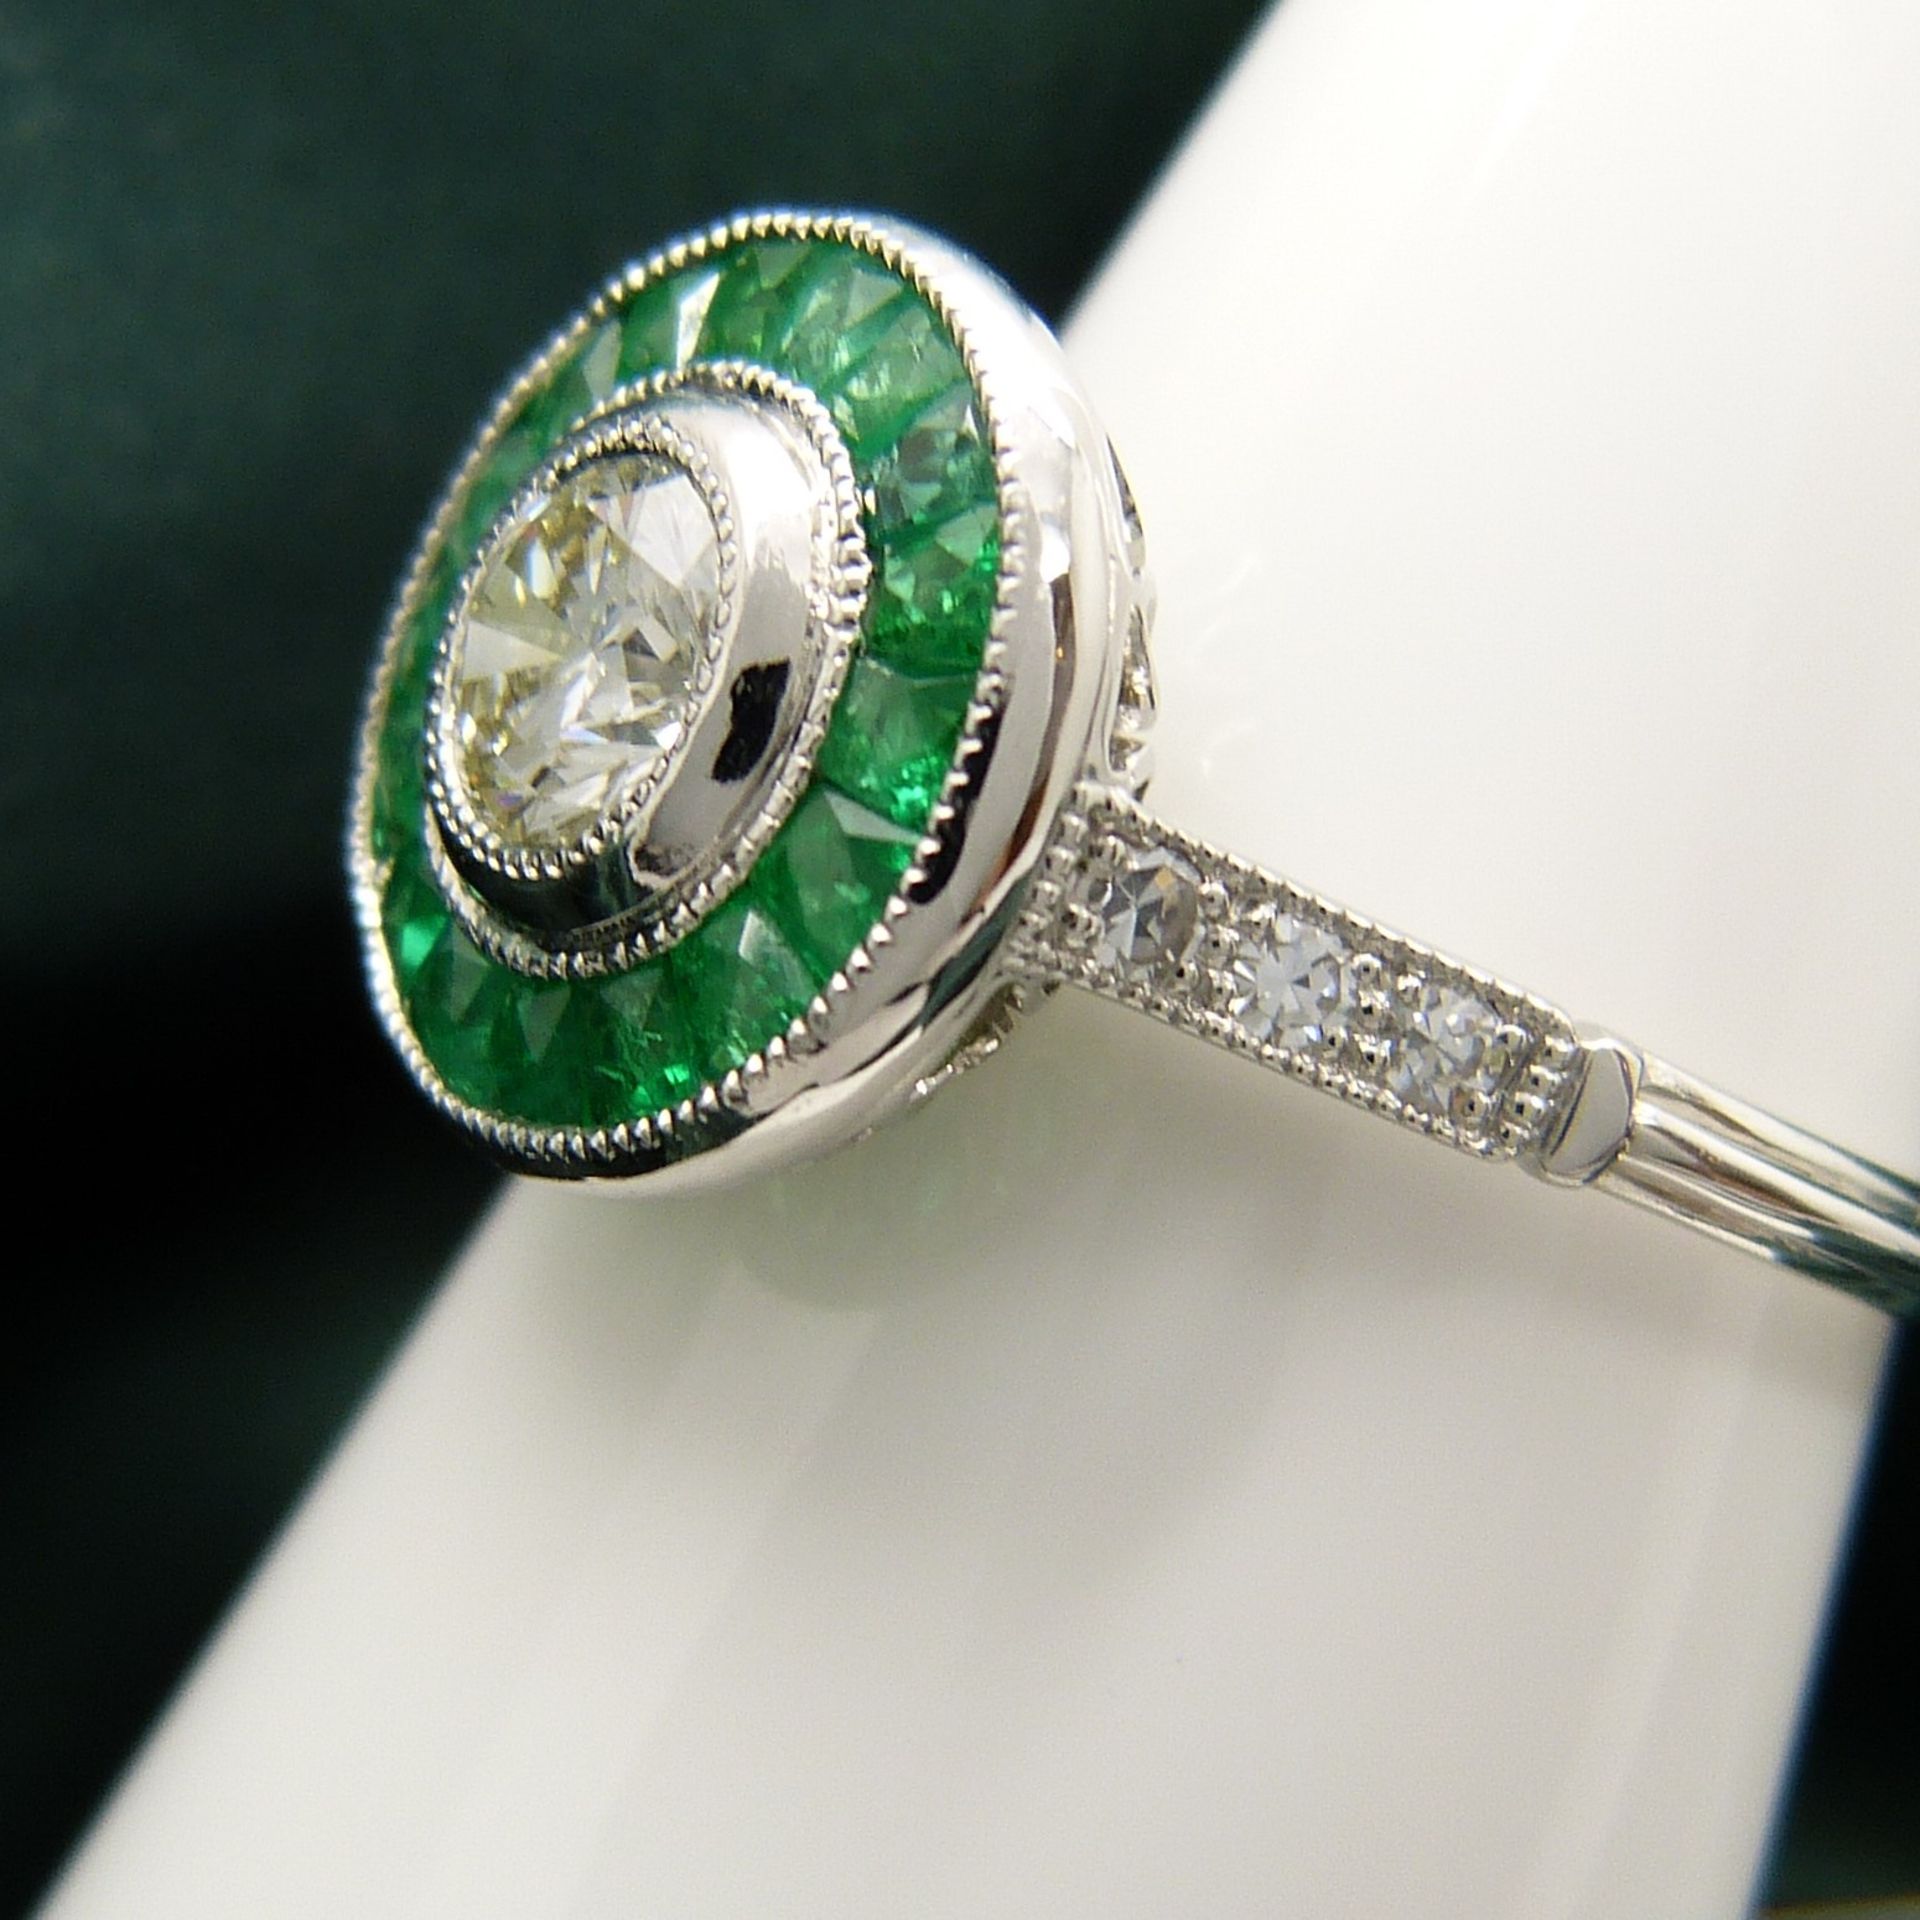 A target-style ring set with round brilliant-cut diamonds and emeralds, platinum - Image 4 of 6